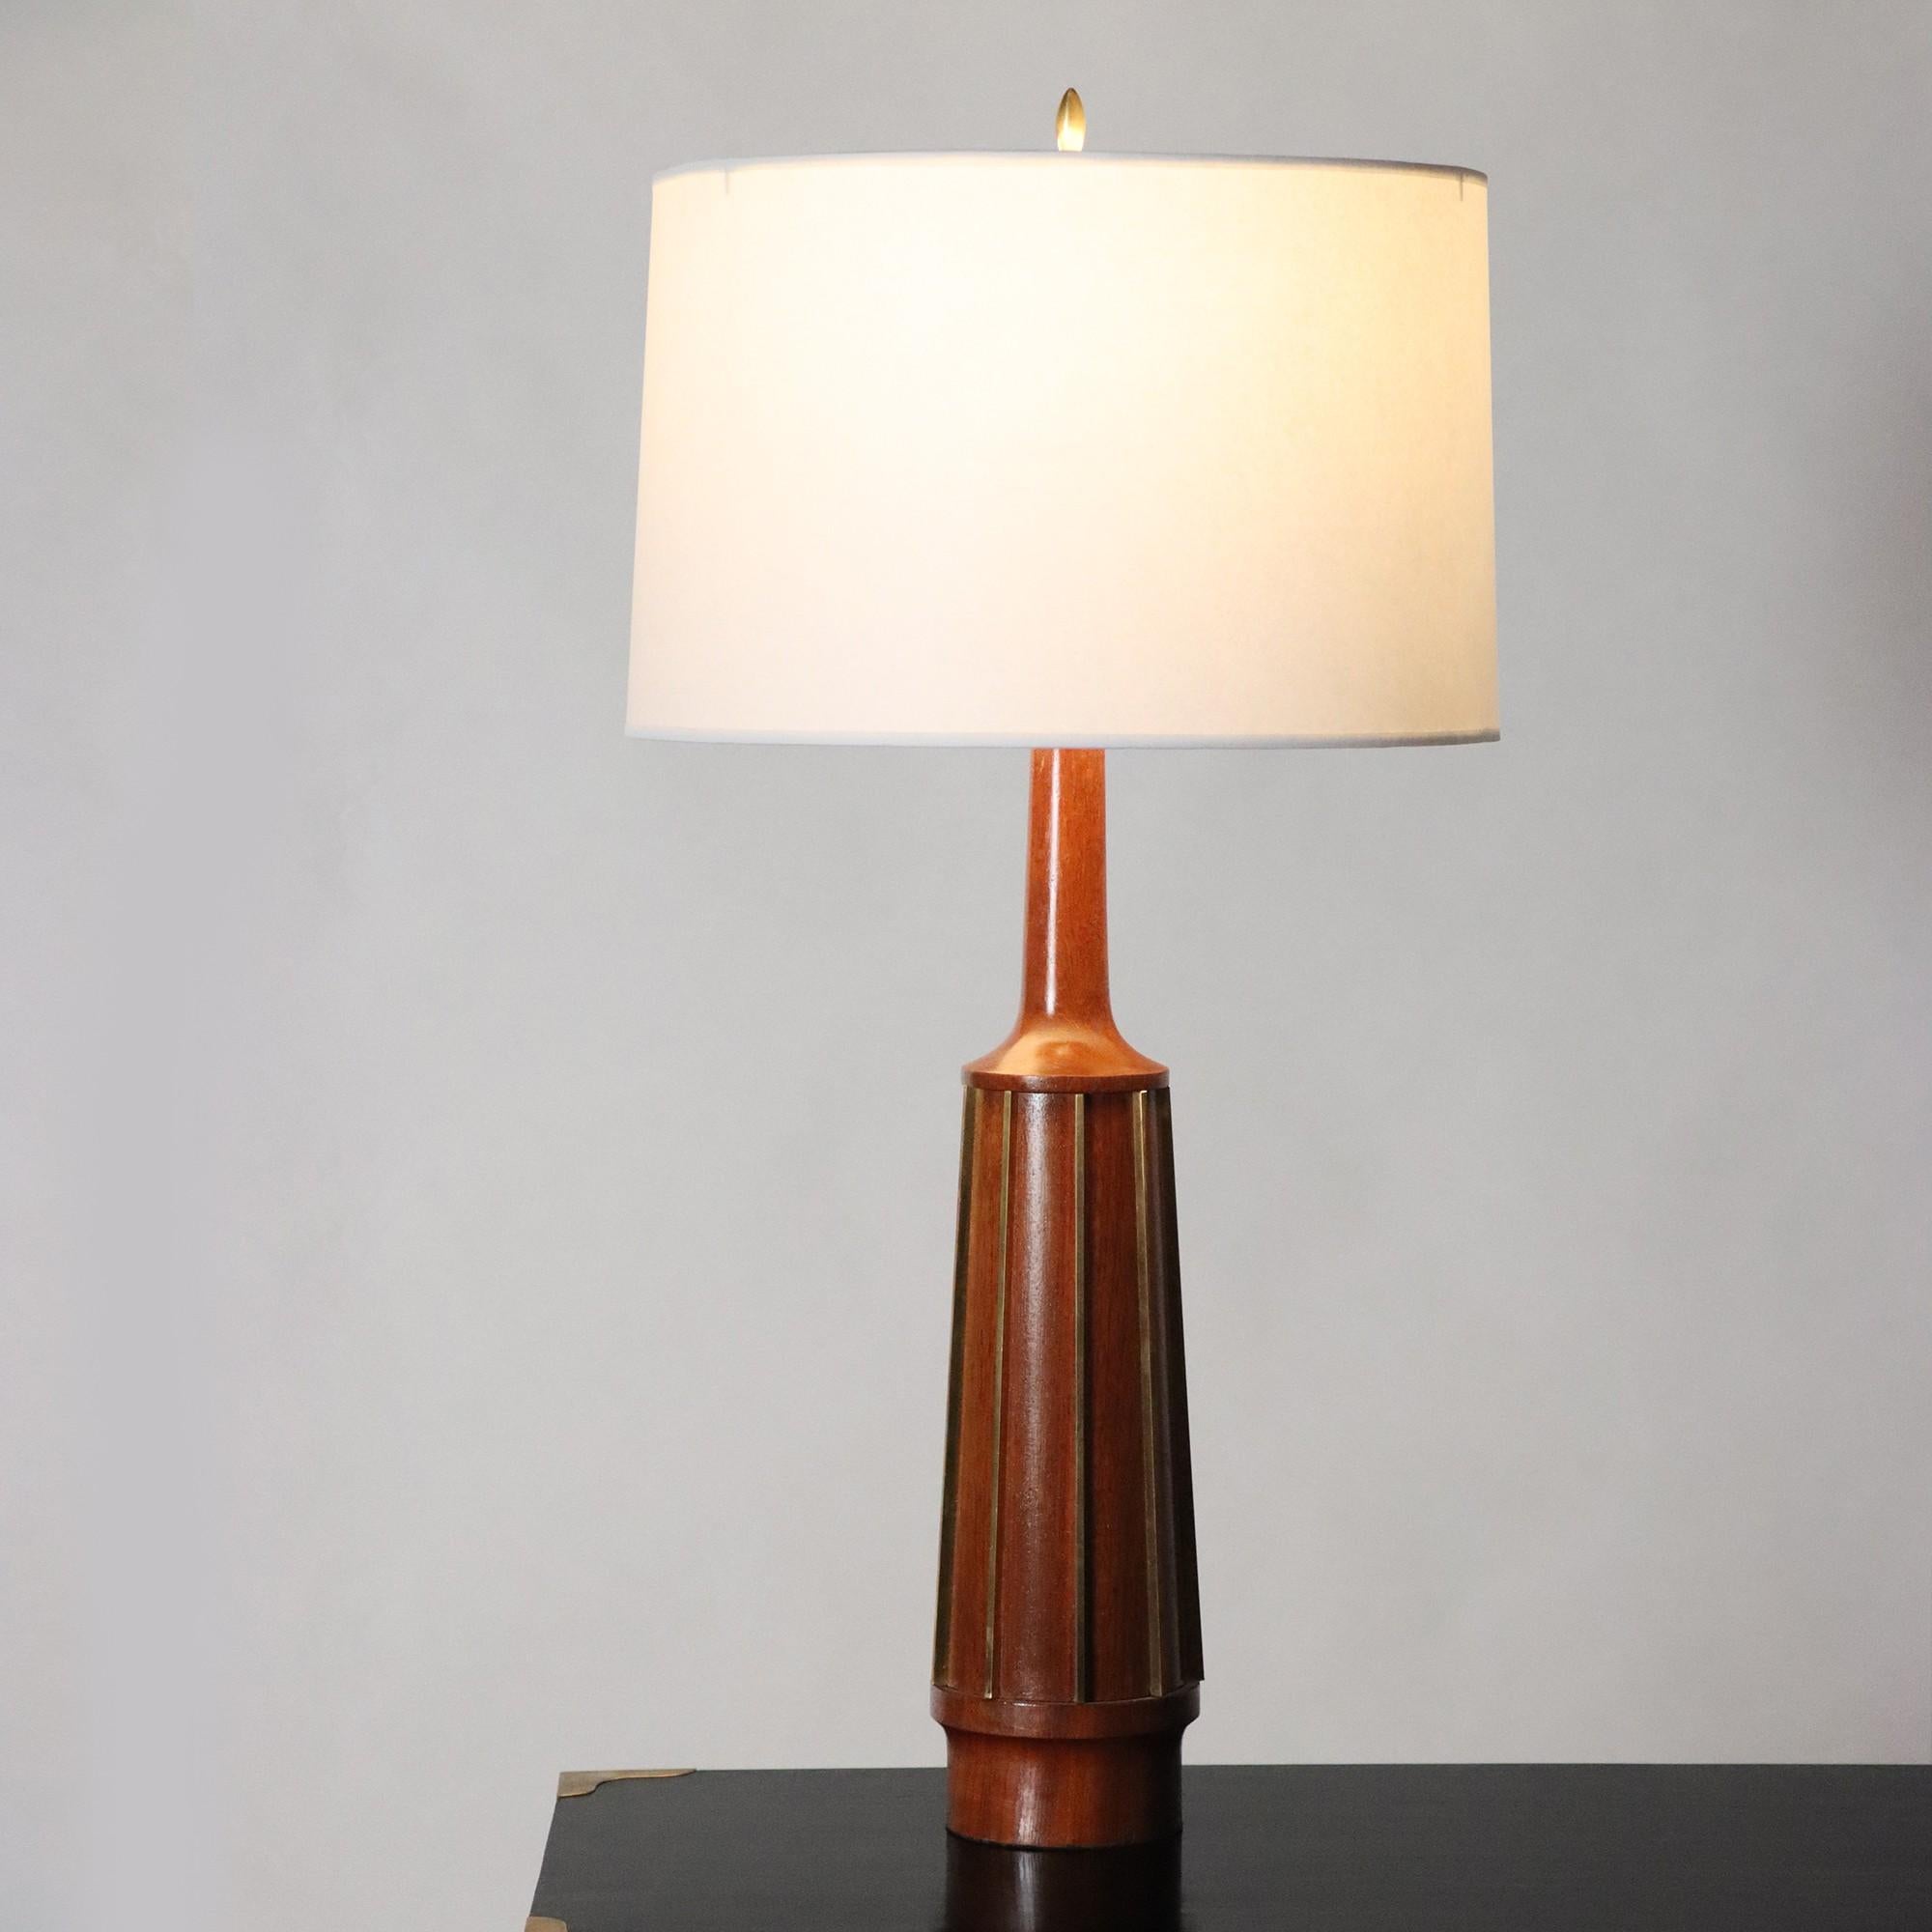 An elegant pair of Mid Century Modern table lamps by G. Thurston, circa 1950. Teak Wood and Brass details. Circa 1950.